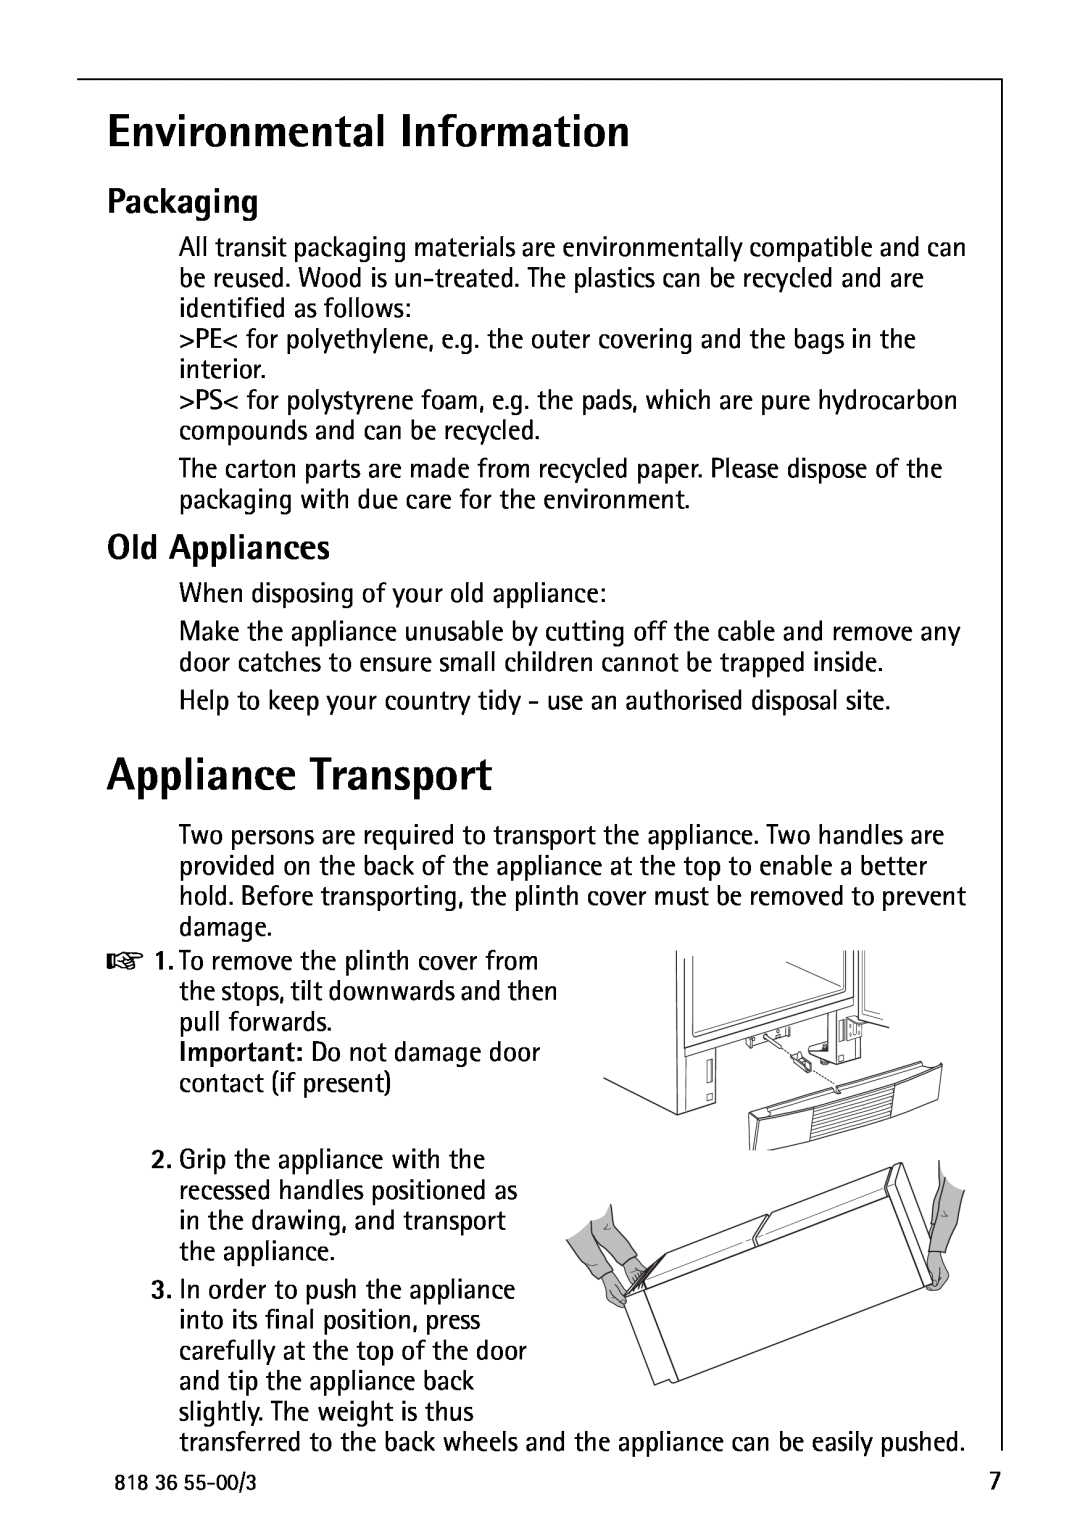 AEG 86378-KG operating instructions Environmental Information, Appliance Transport, Packaging, Old Appliances 